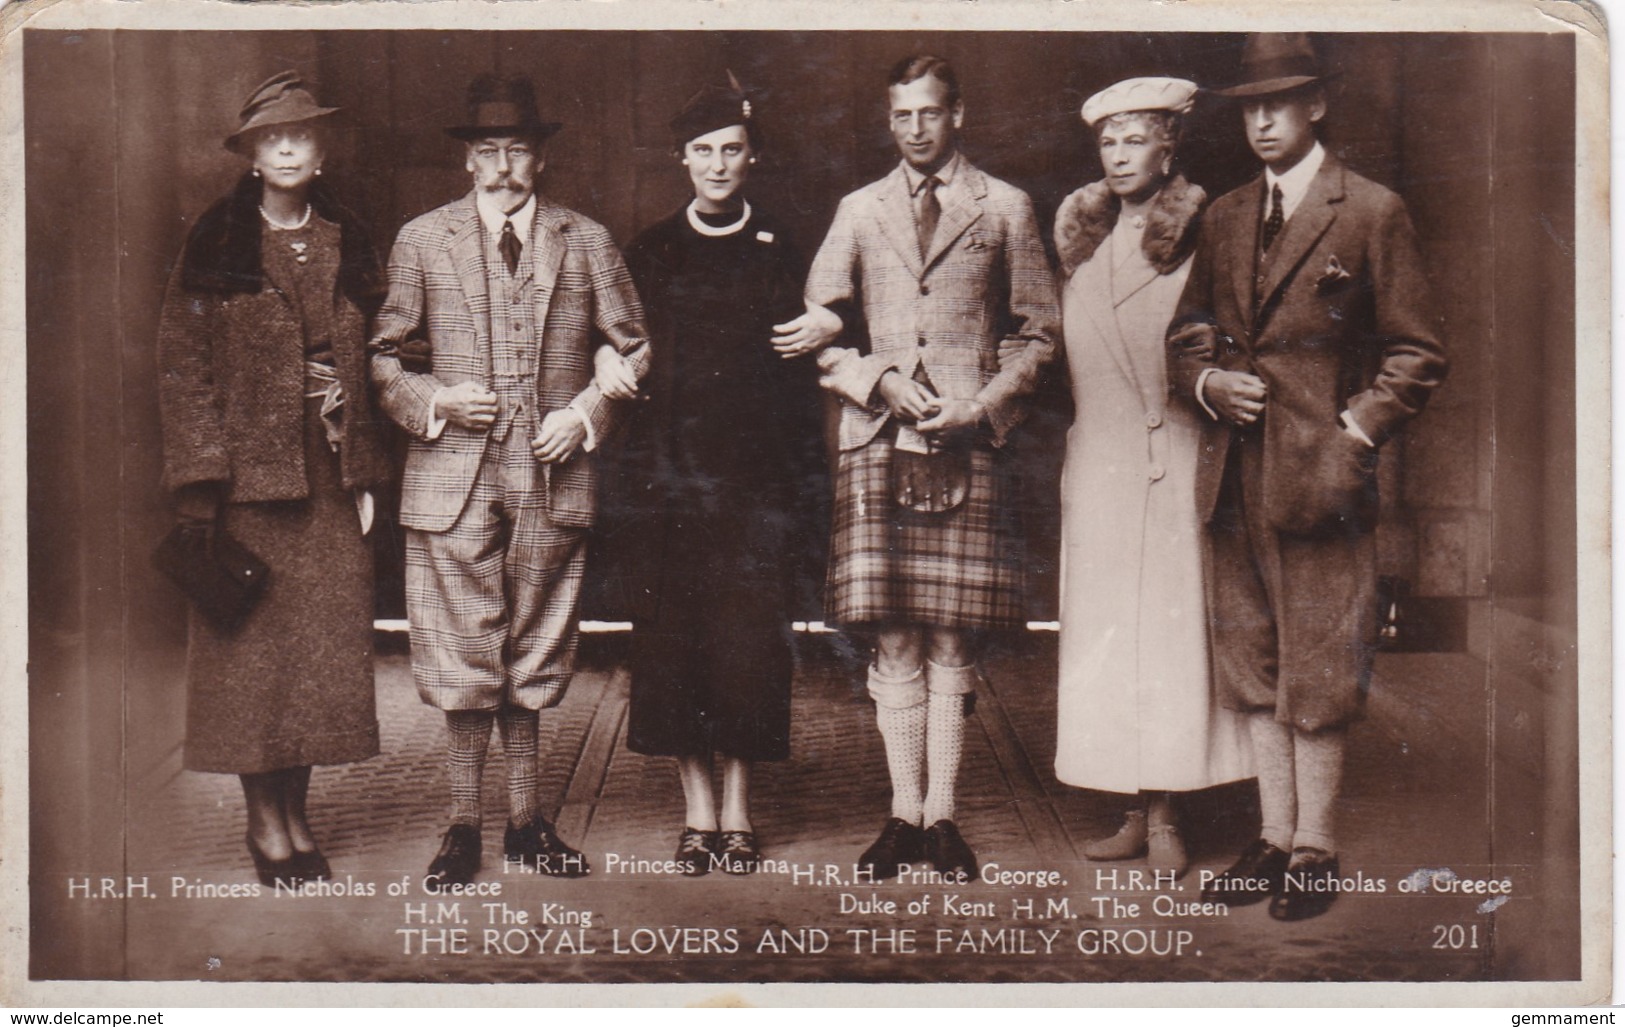 THE ROYAL LOVERS AND THE FAMILY GROUP - Royal Families